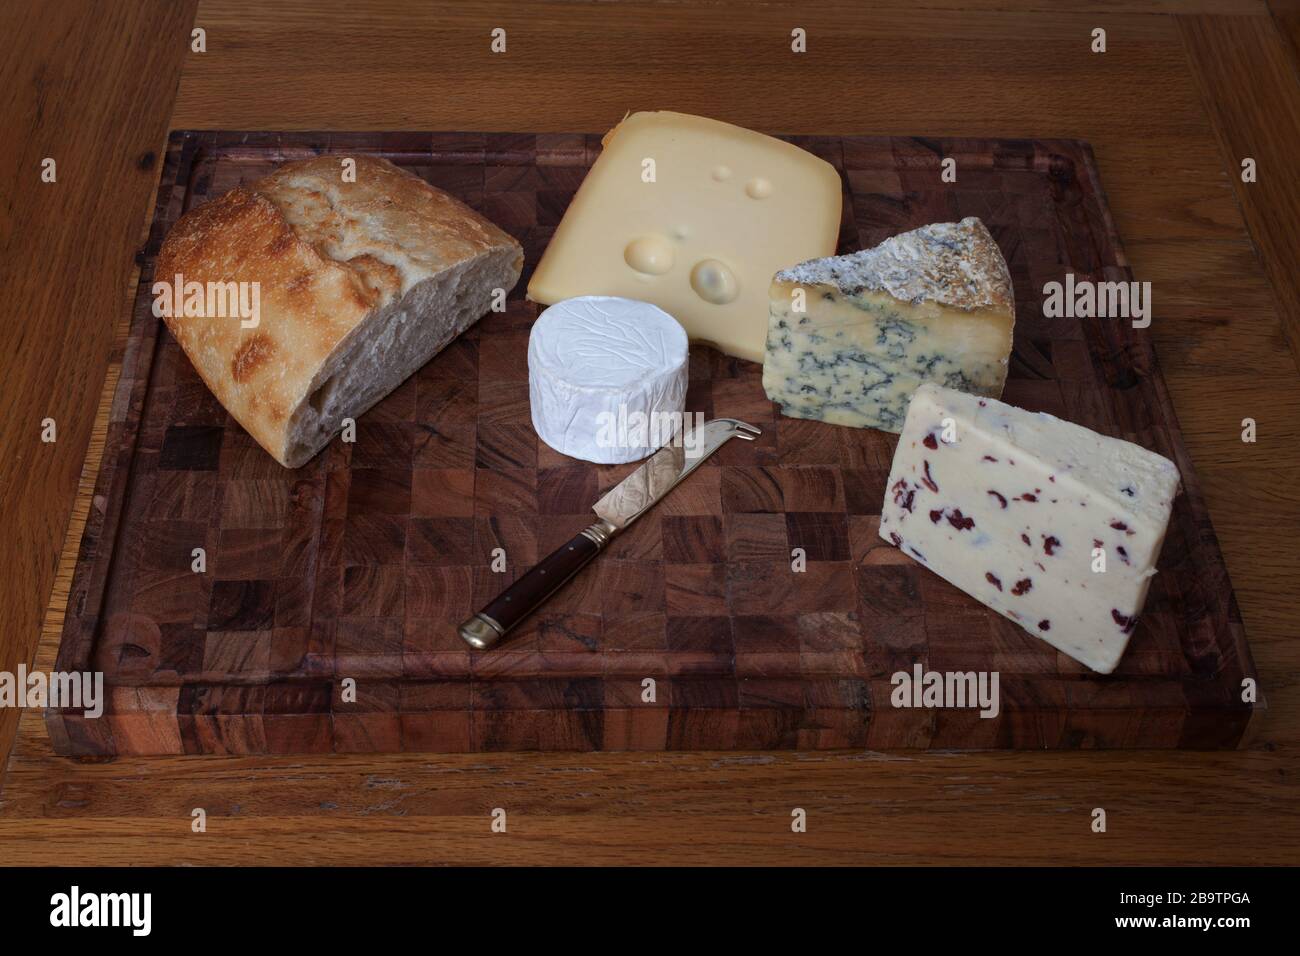 Sourdough with Wensleydale, Stilton, Jarlsberg and goat's cheese on a chopping board Stock Photo